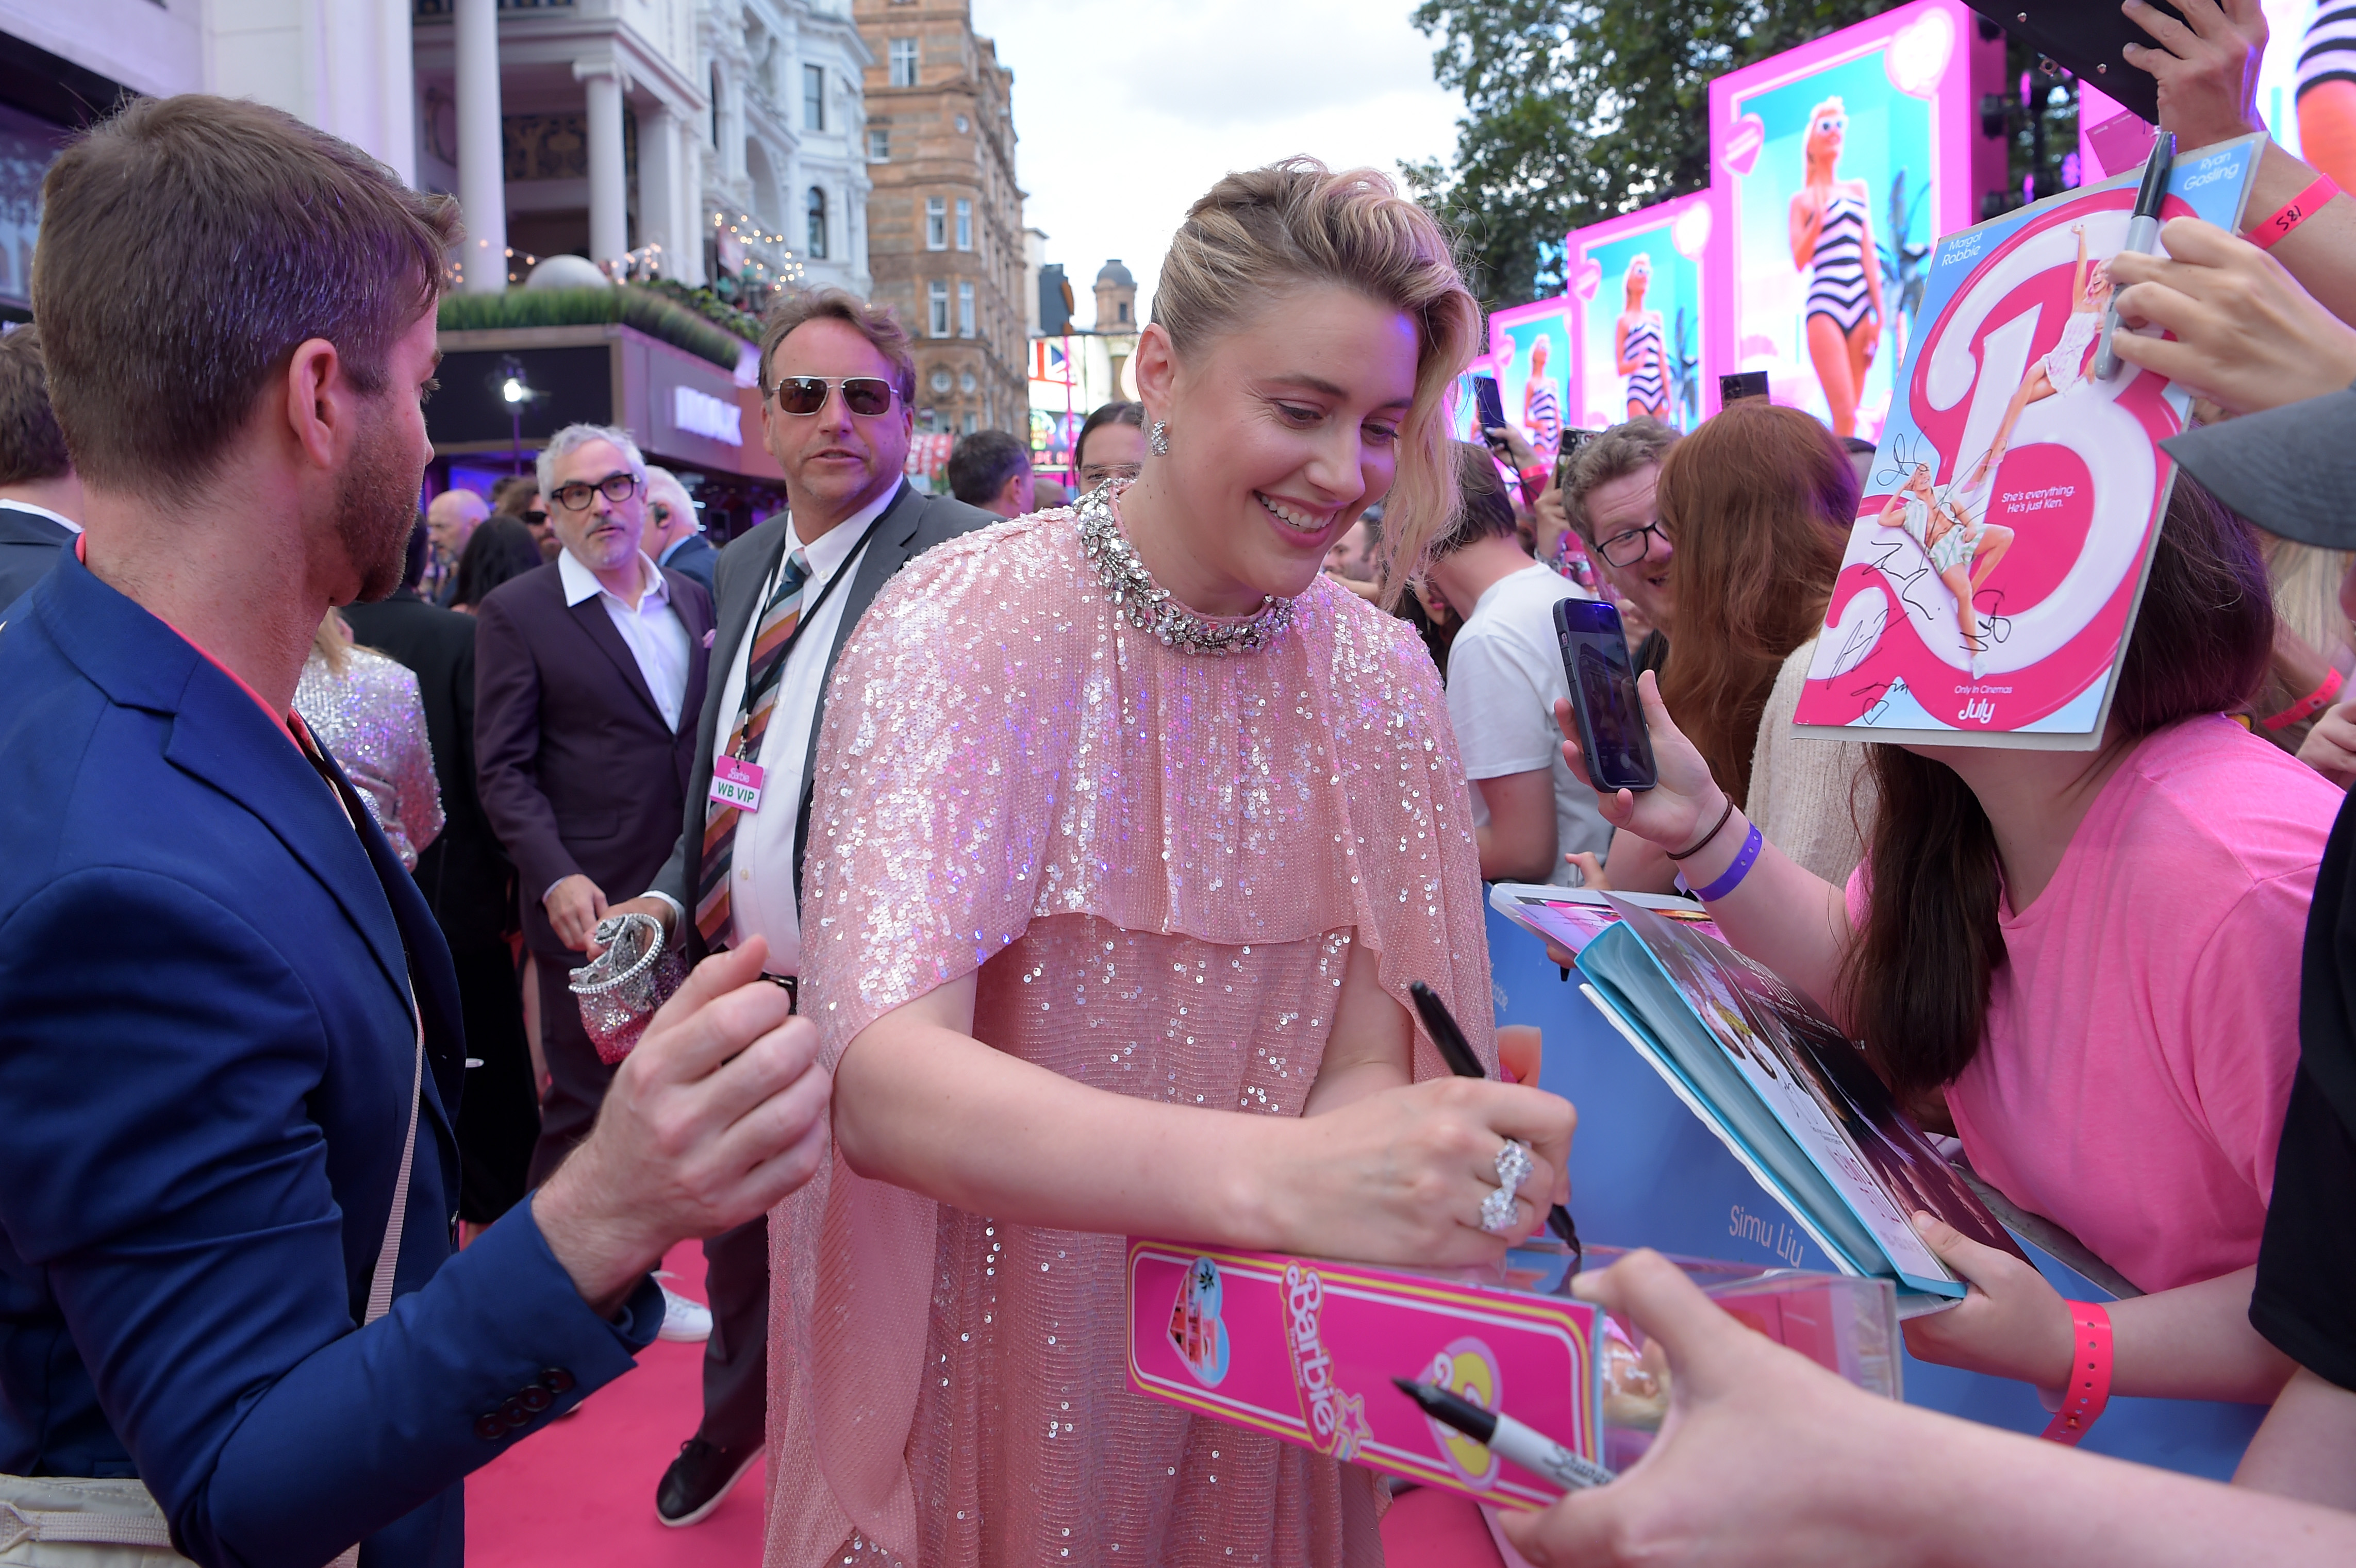 Greta Gerwig attends The European Premiere Of "Barbie" at Cineworld Leicester Square on July 12, 2023 in London, England. (Photo by Antony Jones/Getty Images for Warner Bros.)